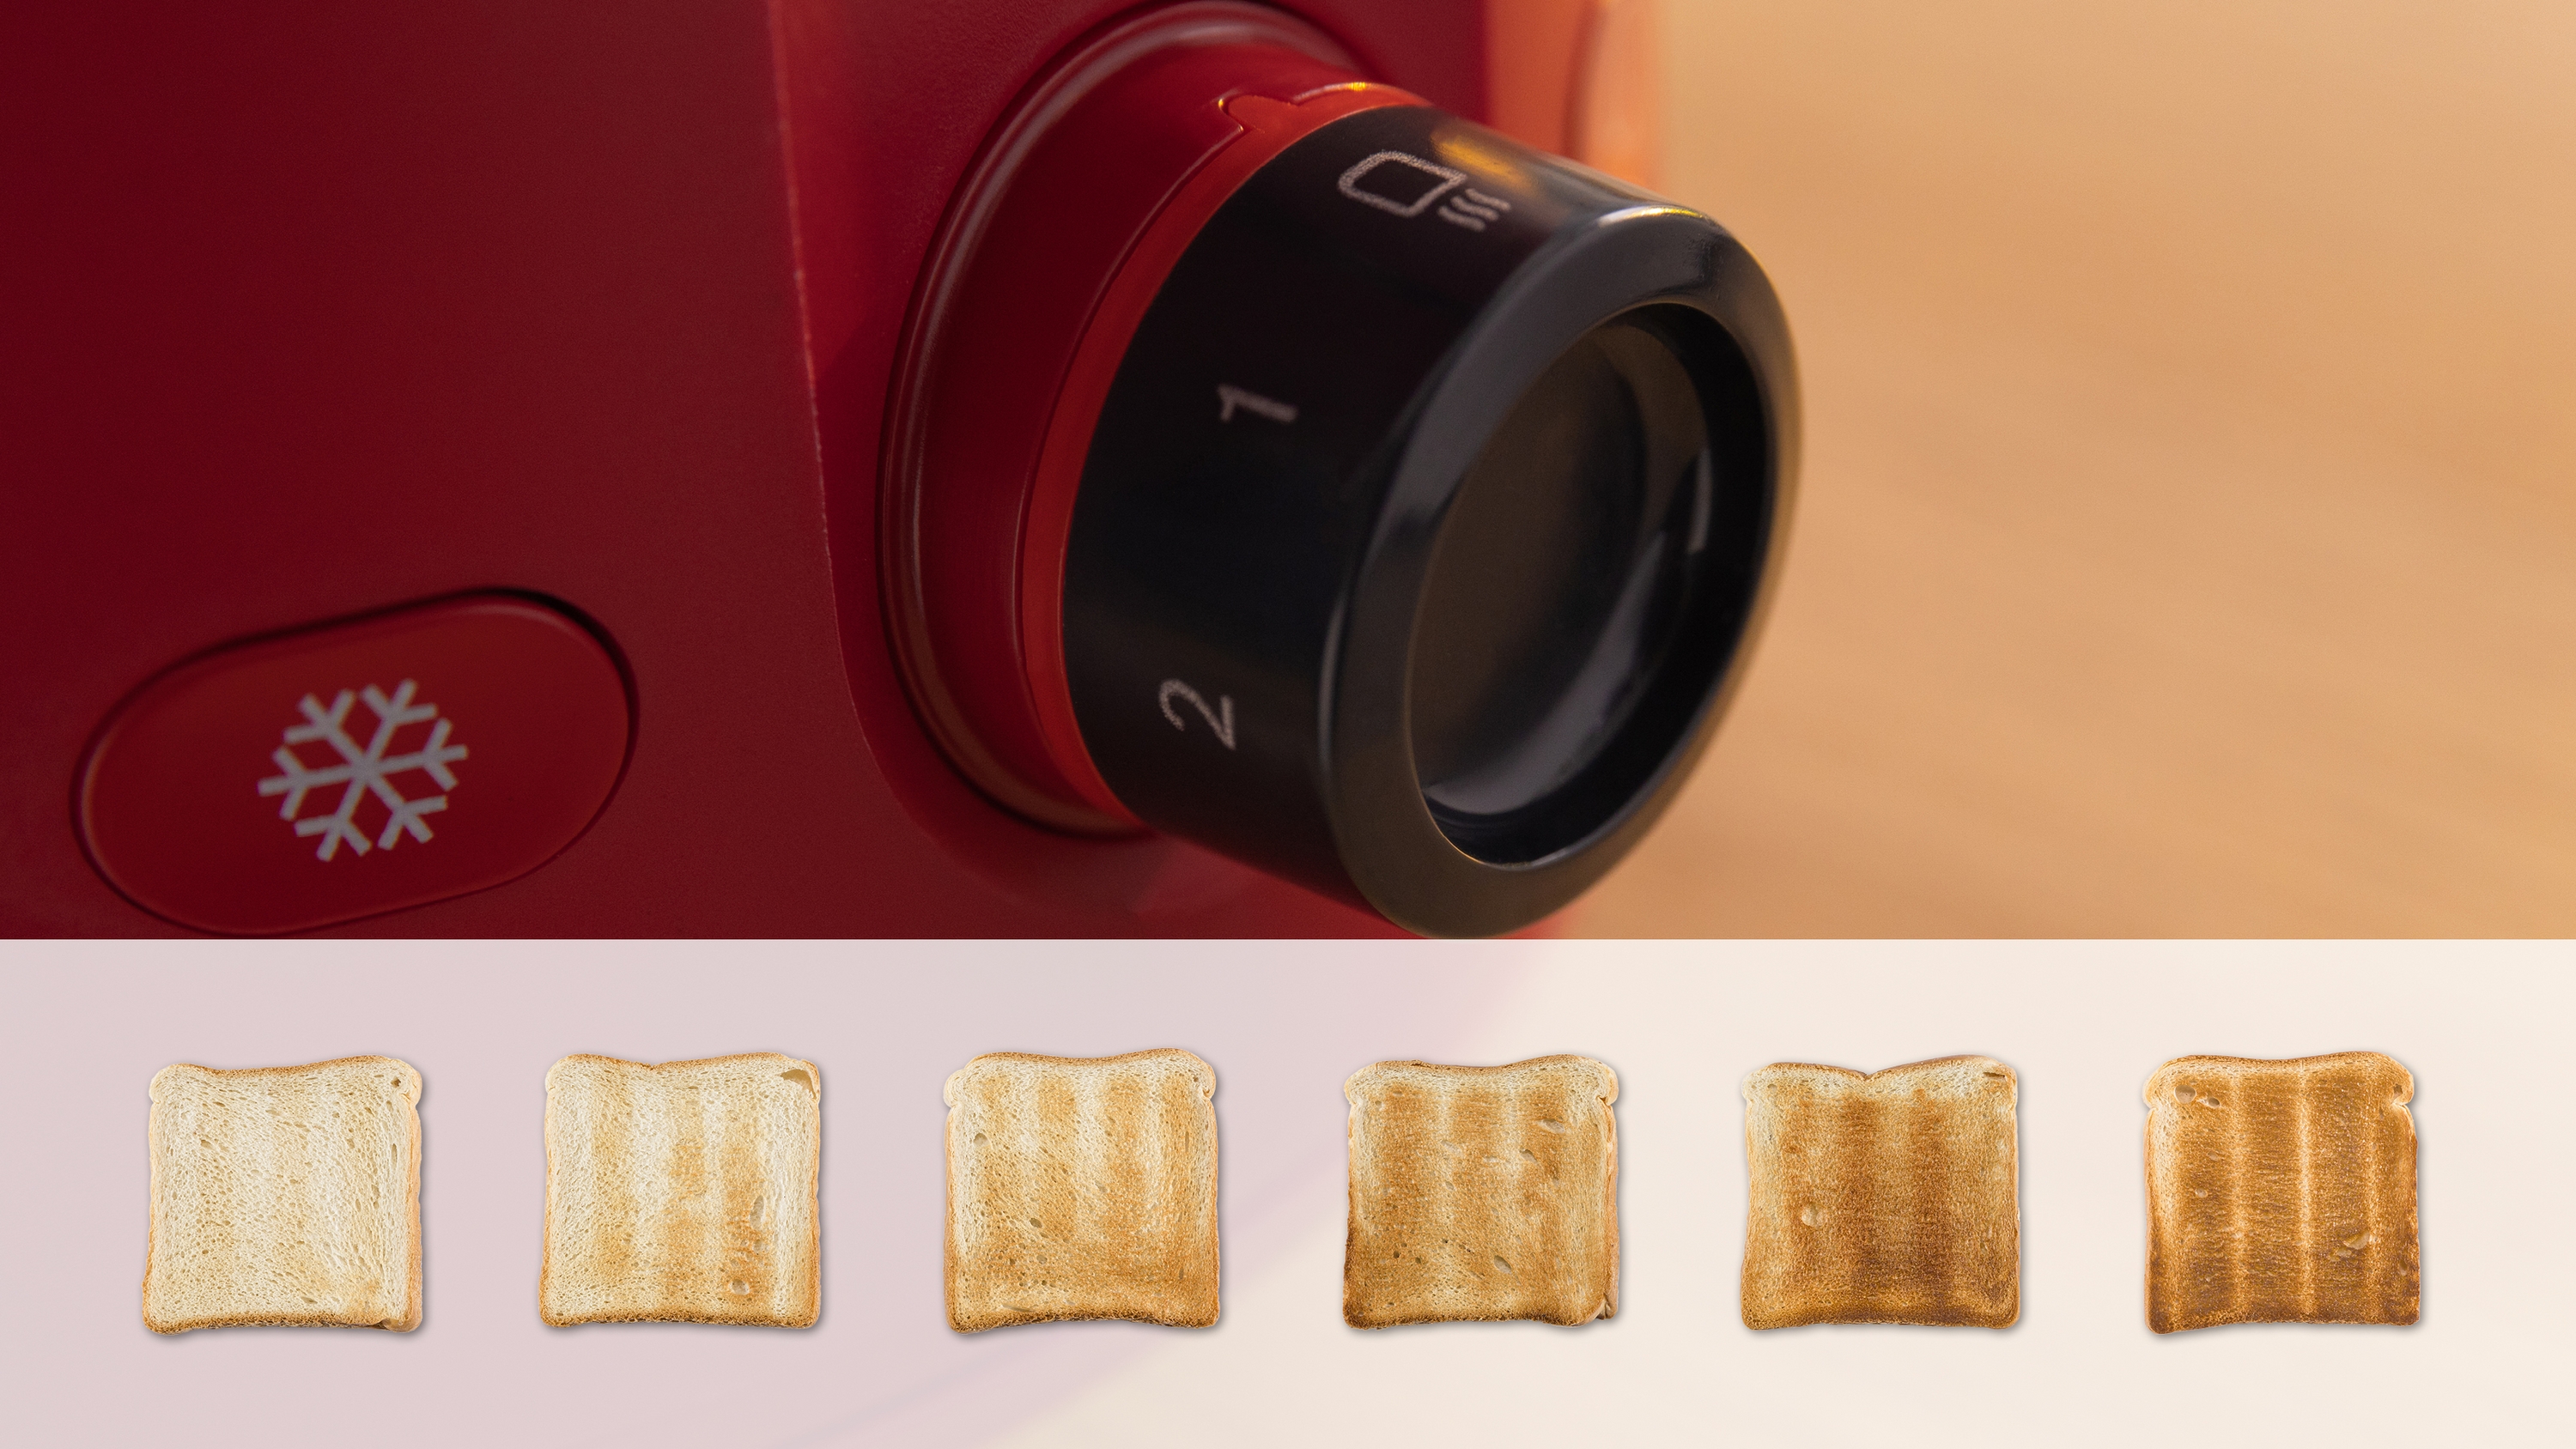 Compact toaster, MyMoment, Red, TAT2M124